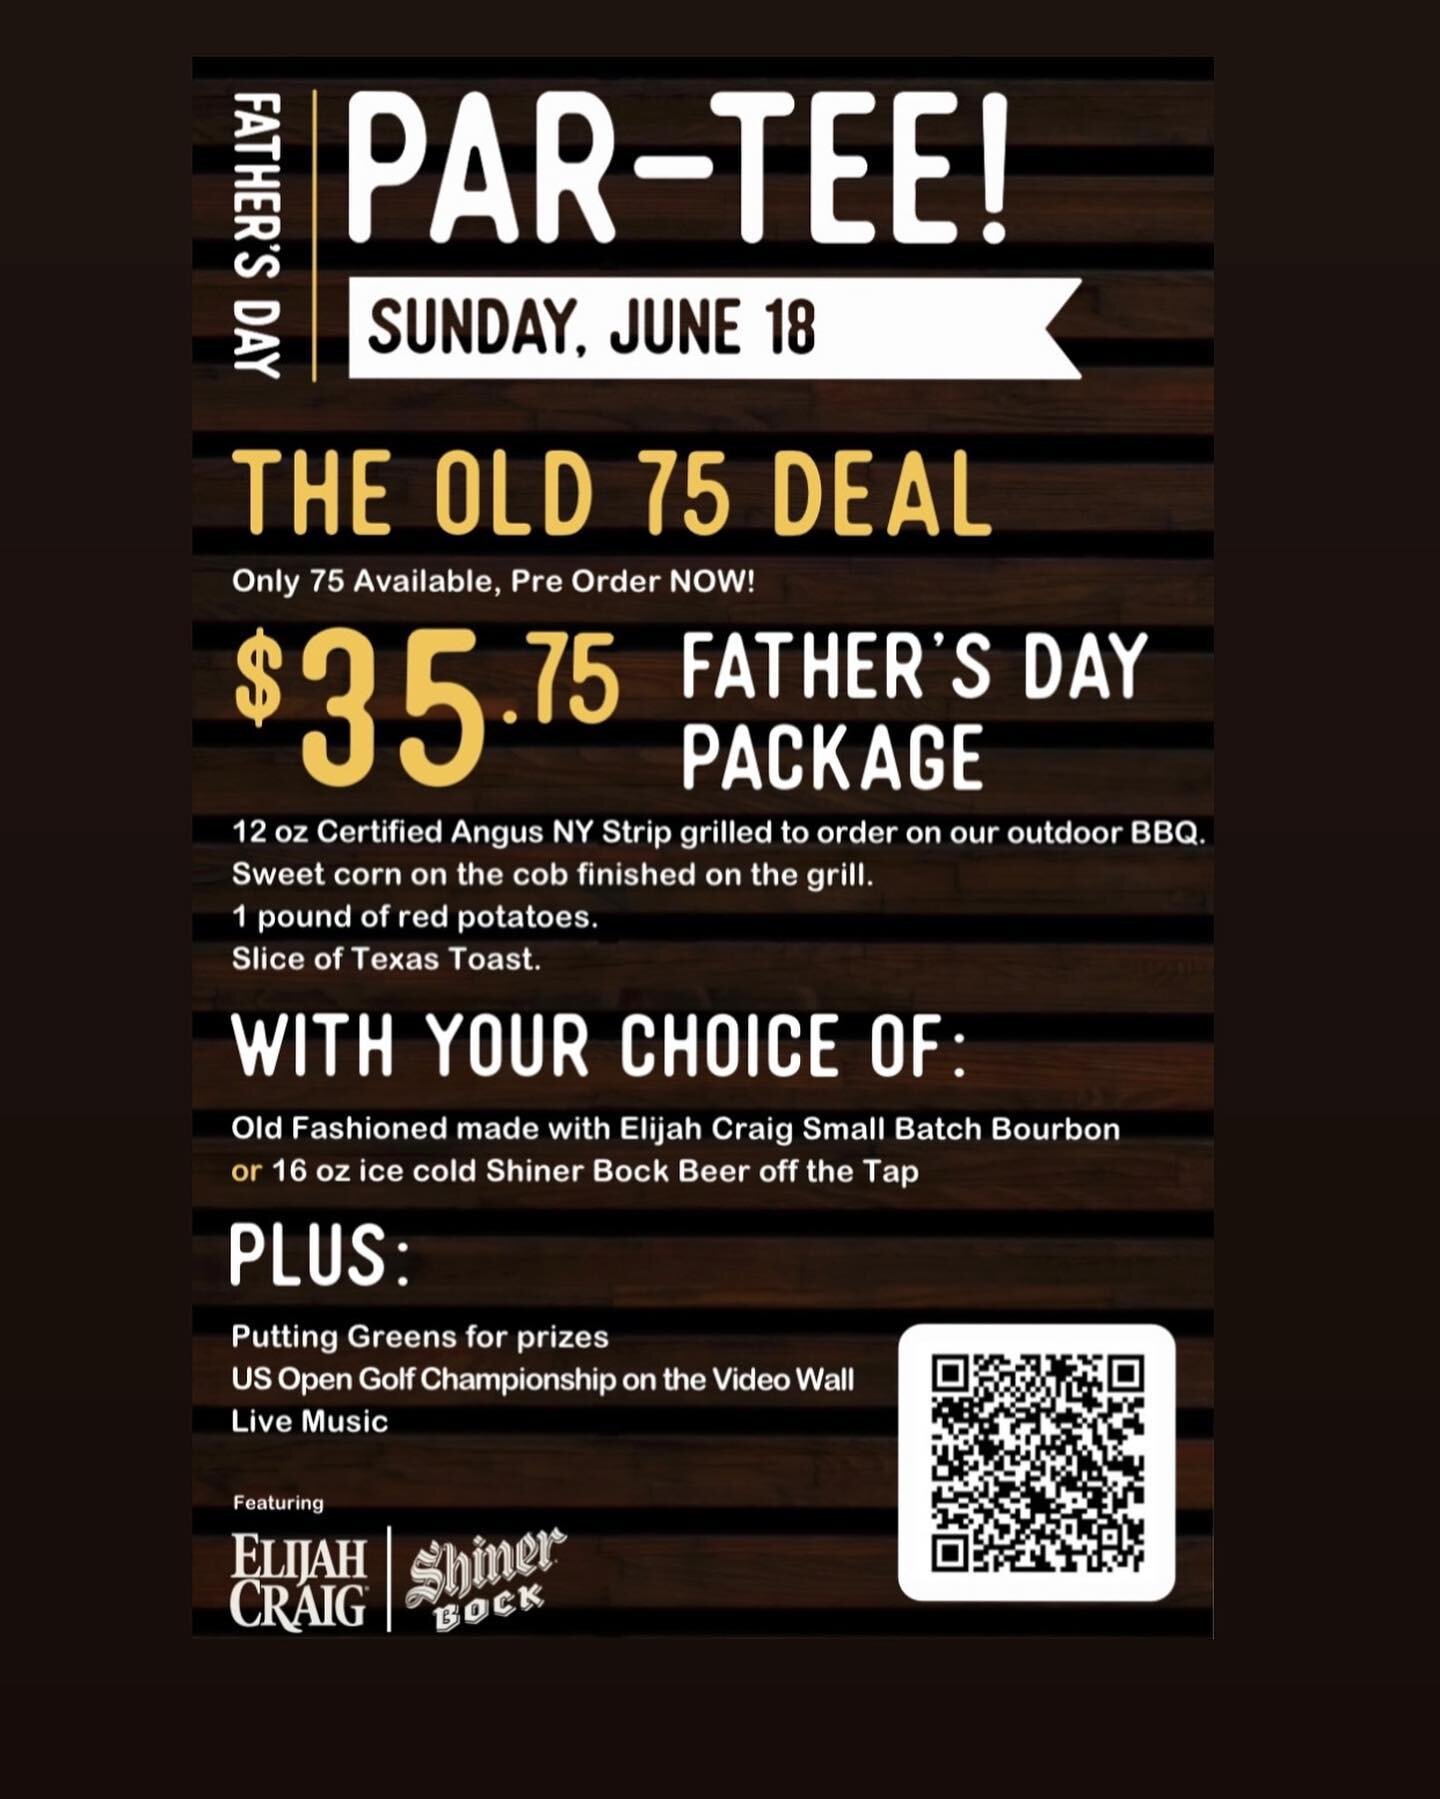 WE'RE NOT KIDDING YOU!

We're doing it BIG - Texas style for #FathersDay 2023 👨

Steak. Bourbon. Beer. Golf. Live Music. Only $35.75! 🤑

THE OLD 75 DAD DEAL | ONLY 75 AVAILABLE SO PRE-ORDER NOW!

$35.75 Father's Day Package
🥩 Steak (12 oz. Certifi